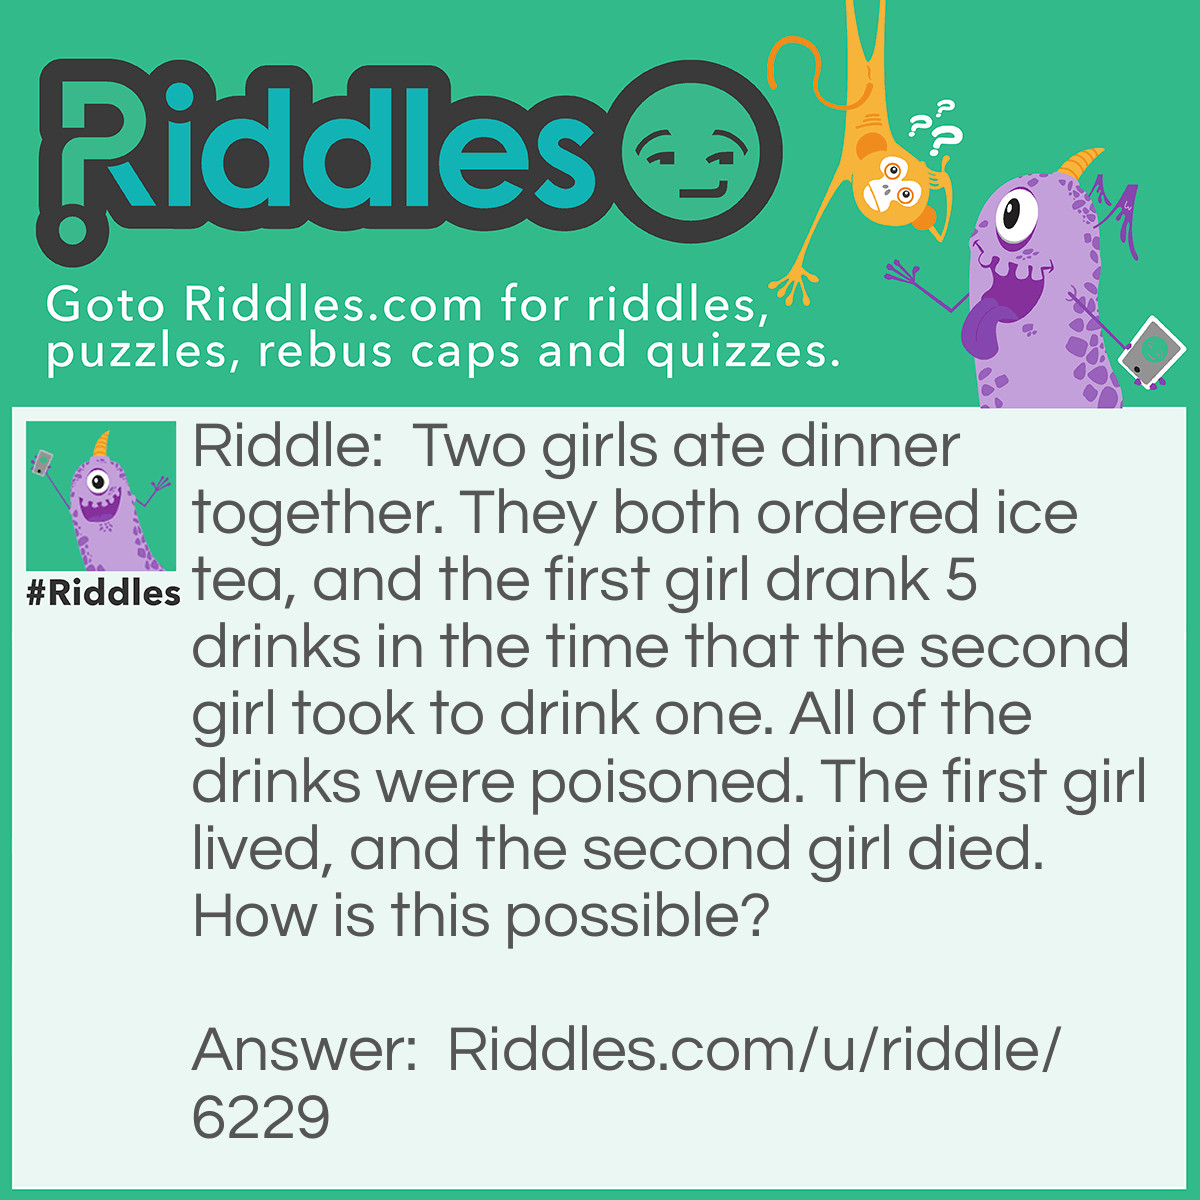 Riddle: Two girls ate dinner together. They both ordered ice tea, and the first girl drank 5 drinks in the time that the second girl took to drink one. All of the drinks were poisoned. The first girl lived, and the second girl died. How is this possible? Answer: The poison was in the ice, and the ice melted in the second girls drink, while the first girl drank her tea so fast the ice didn't get a chance to melt.